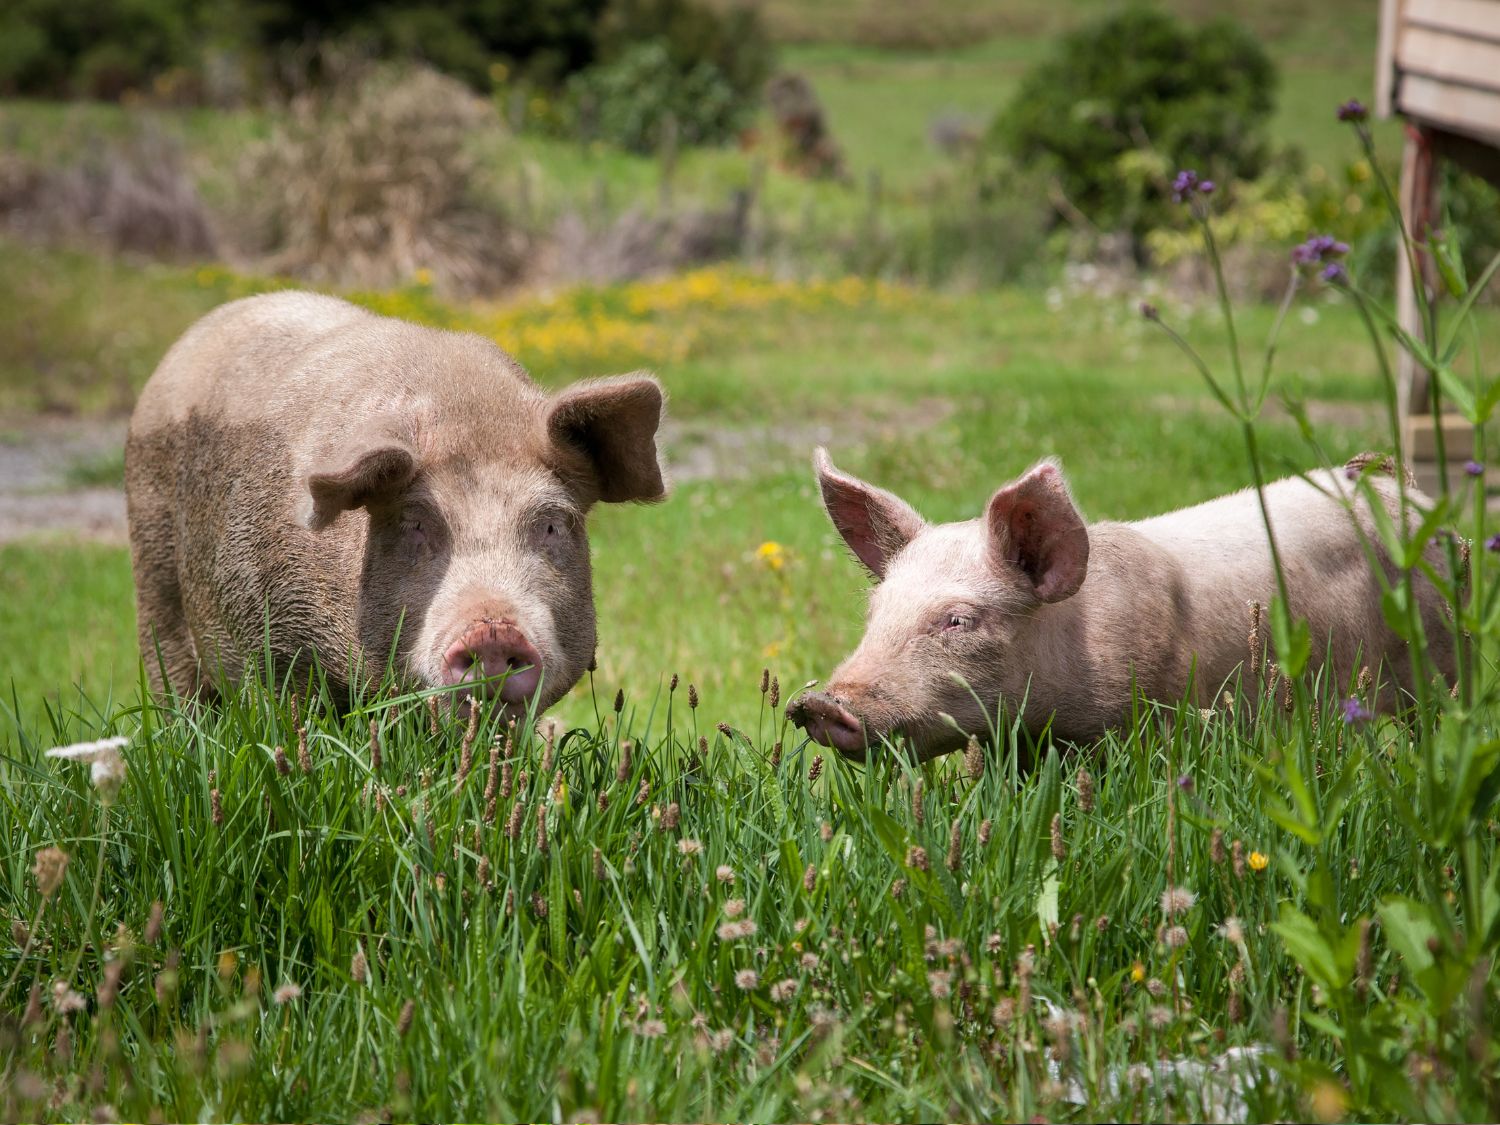 2 pigs outside foraging in a field with wild flowers